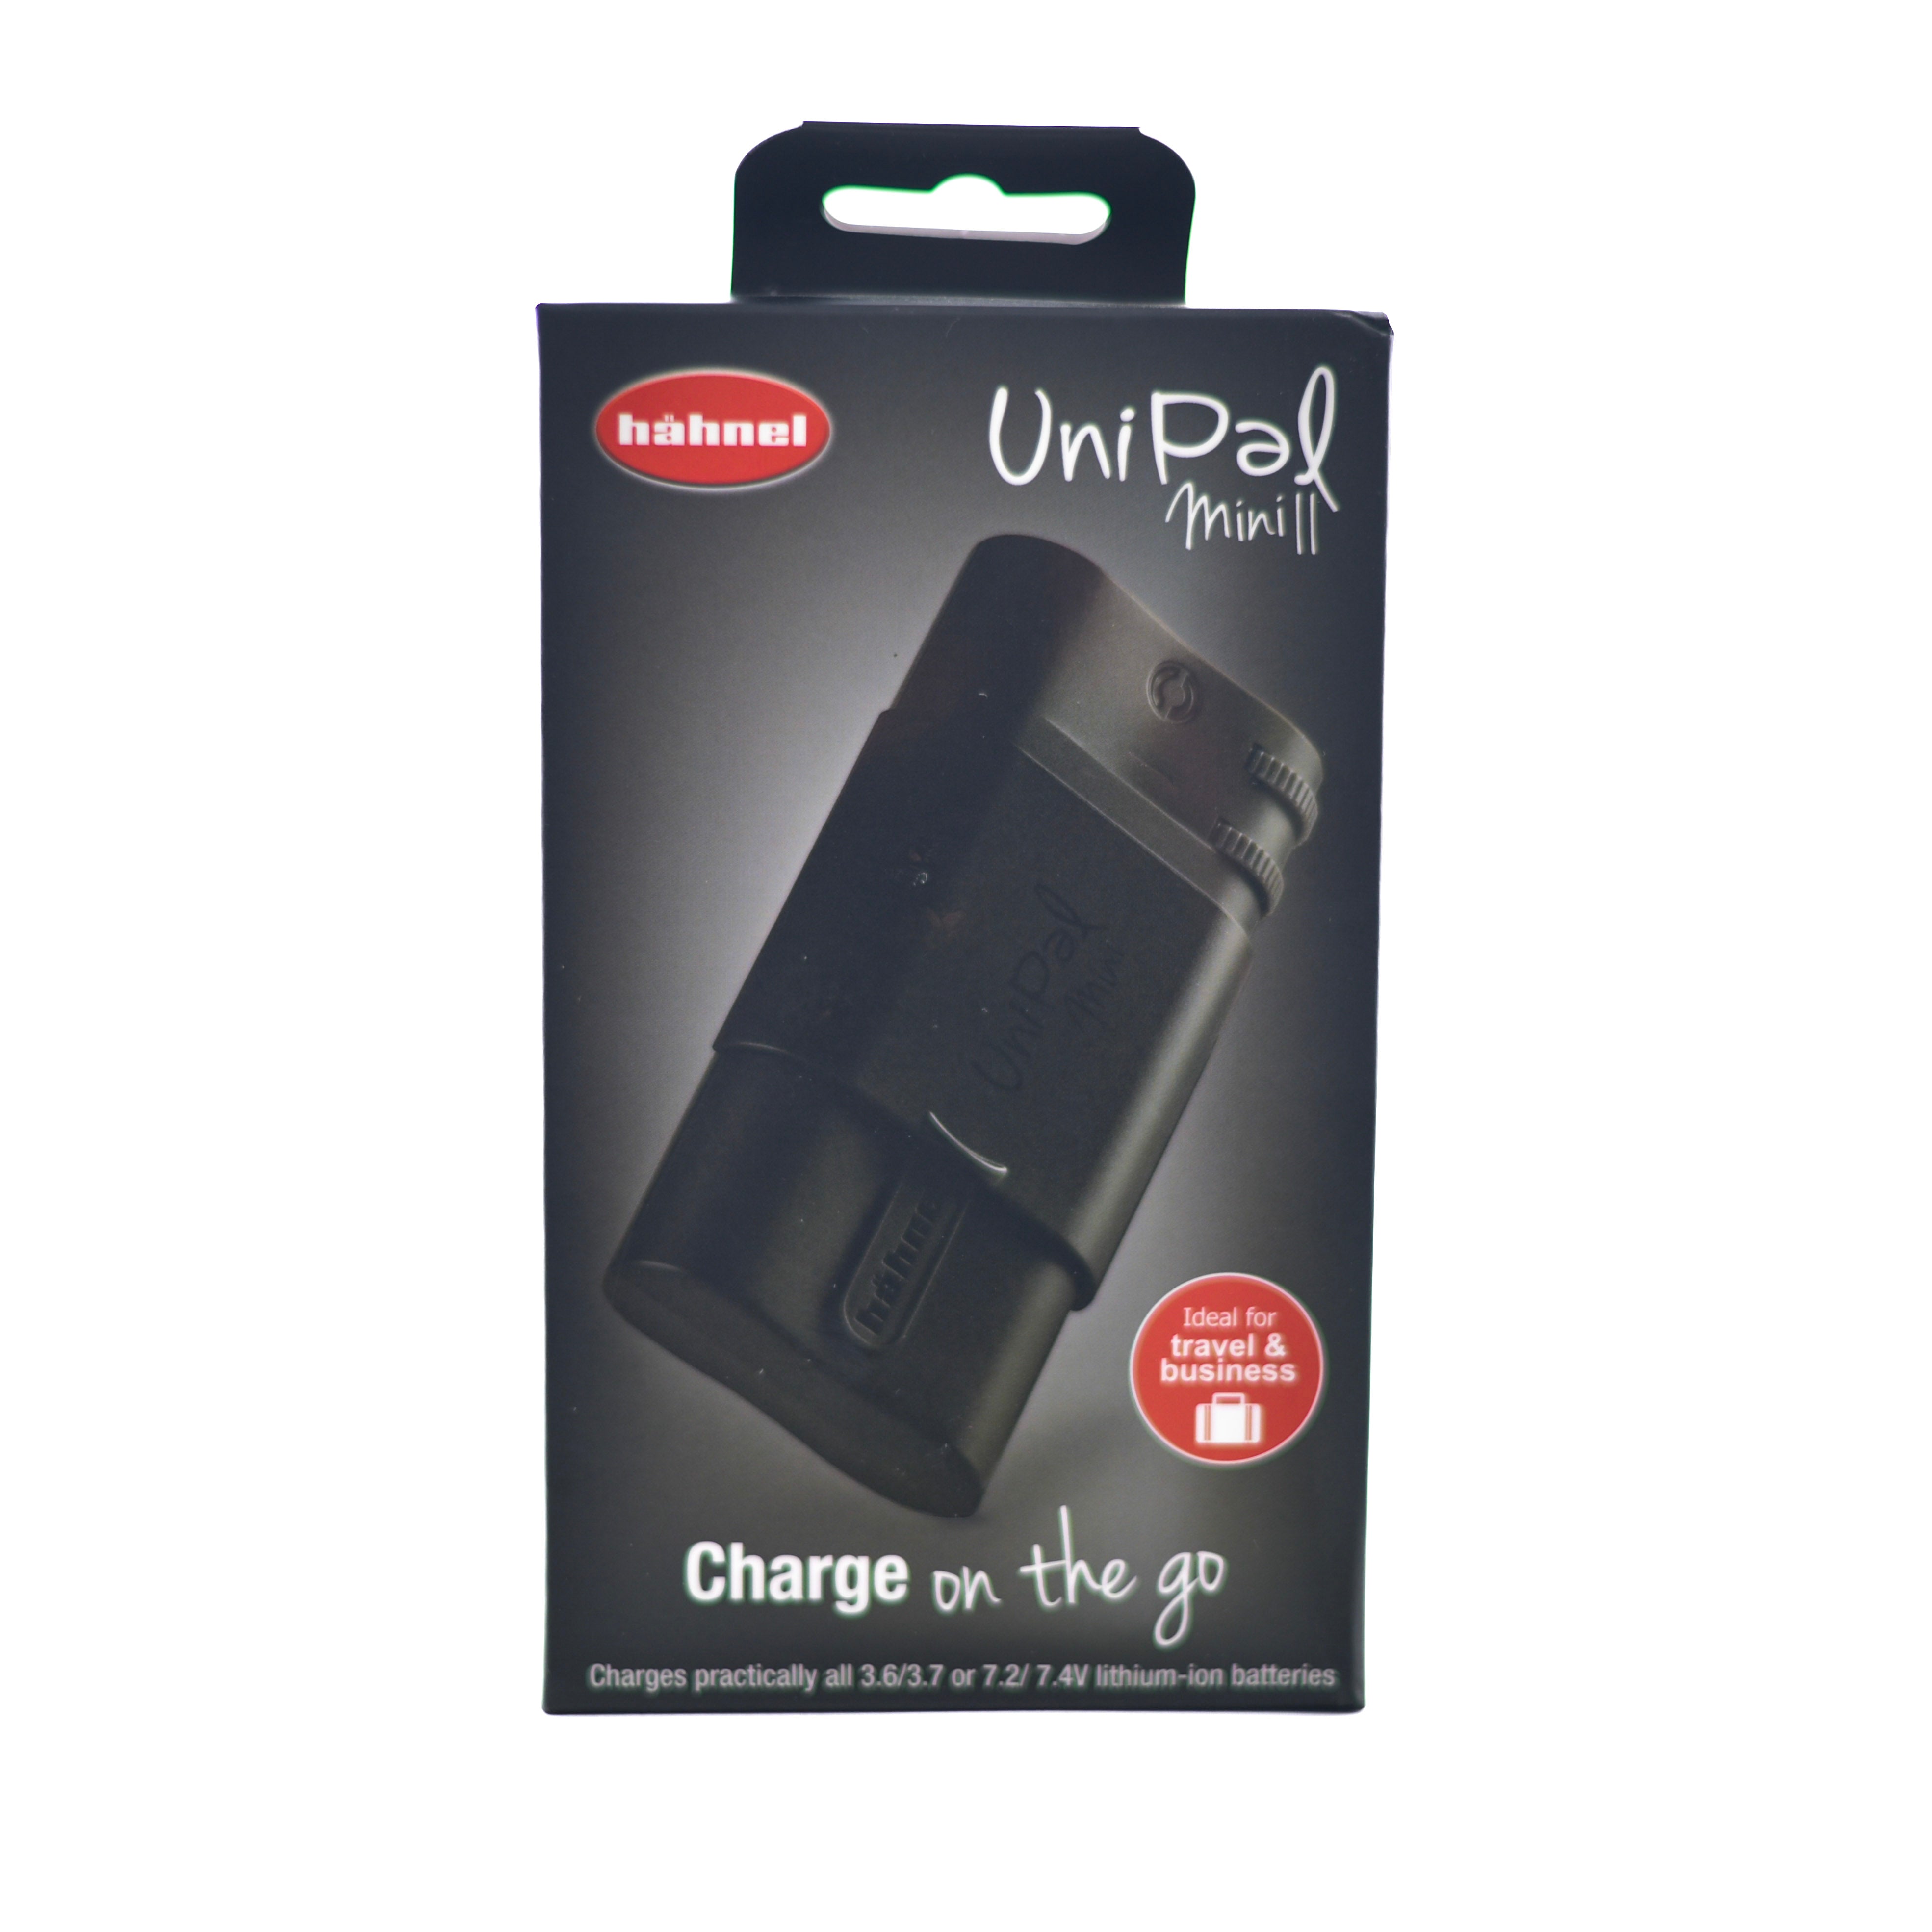 Hahnel Unipal Mini universal charger